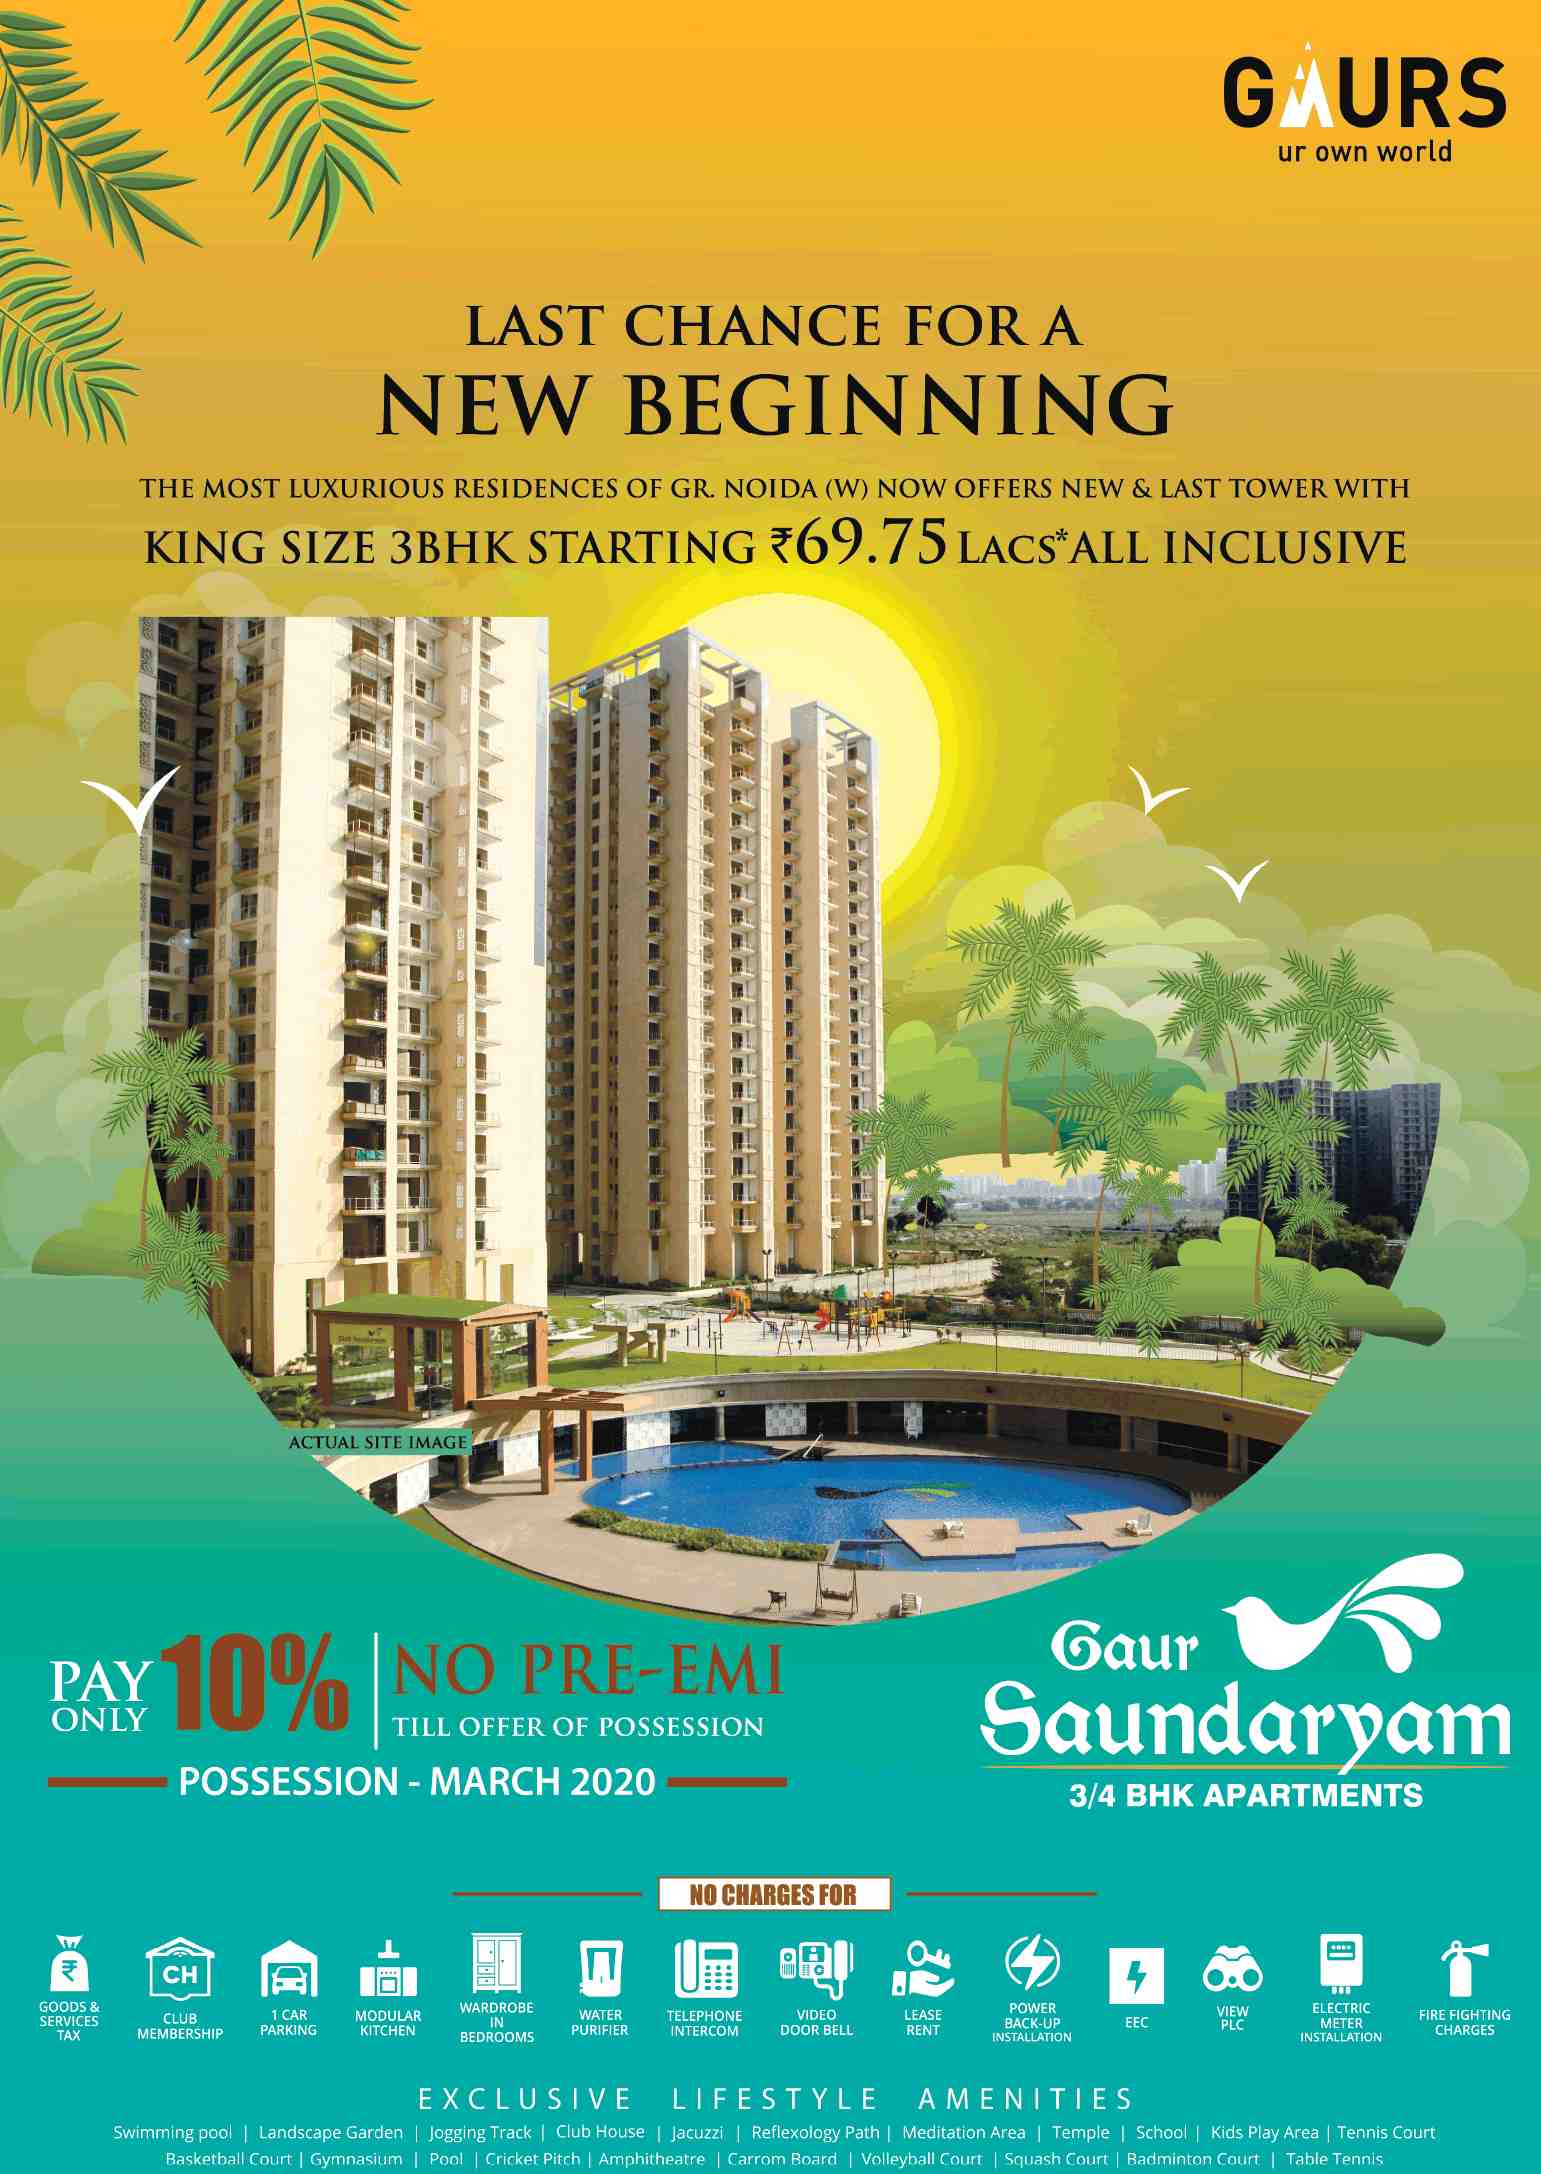 Pay only 10% and no pre-EMI till possession at Gaur Saundaryam in Greater Noida Update